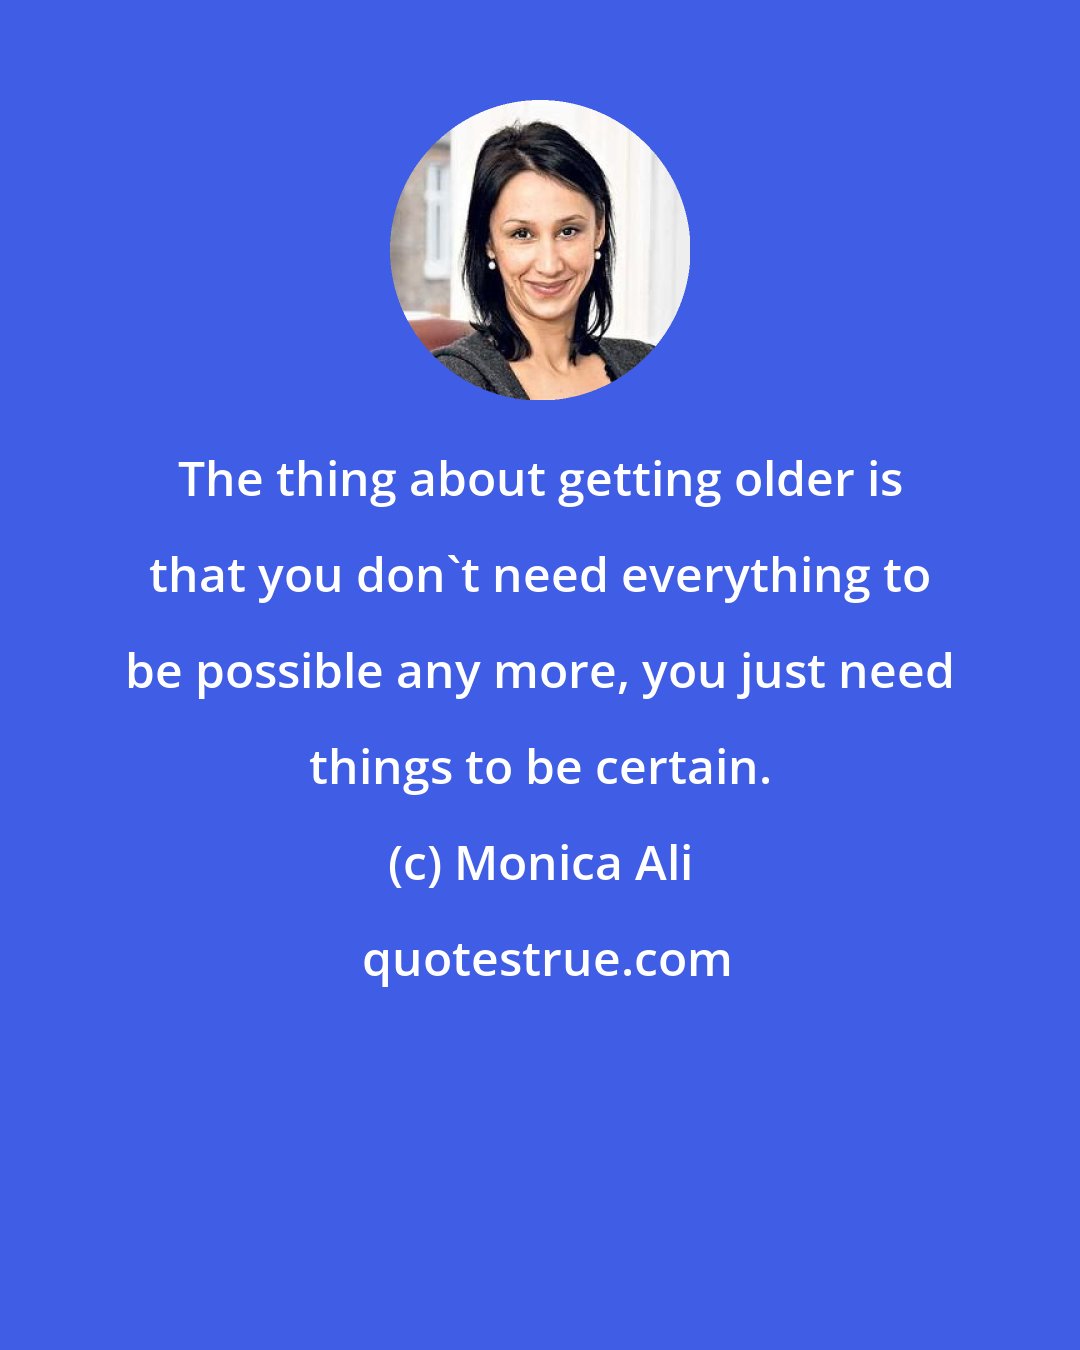 Monica Ali: The thing about getting older is that you don't need everything to be possible any more, you just need things to be certain.